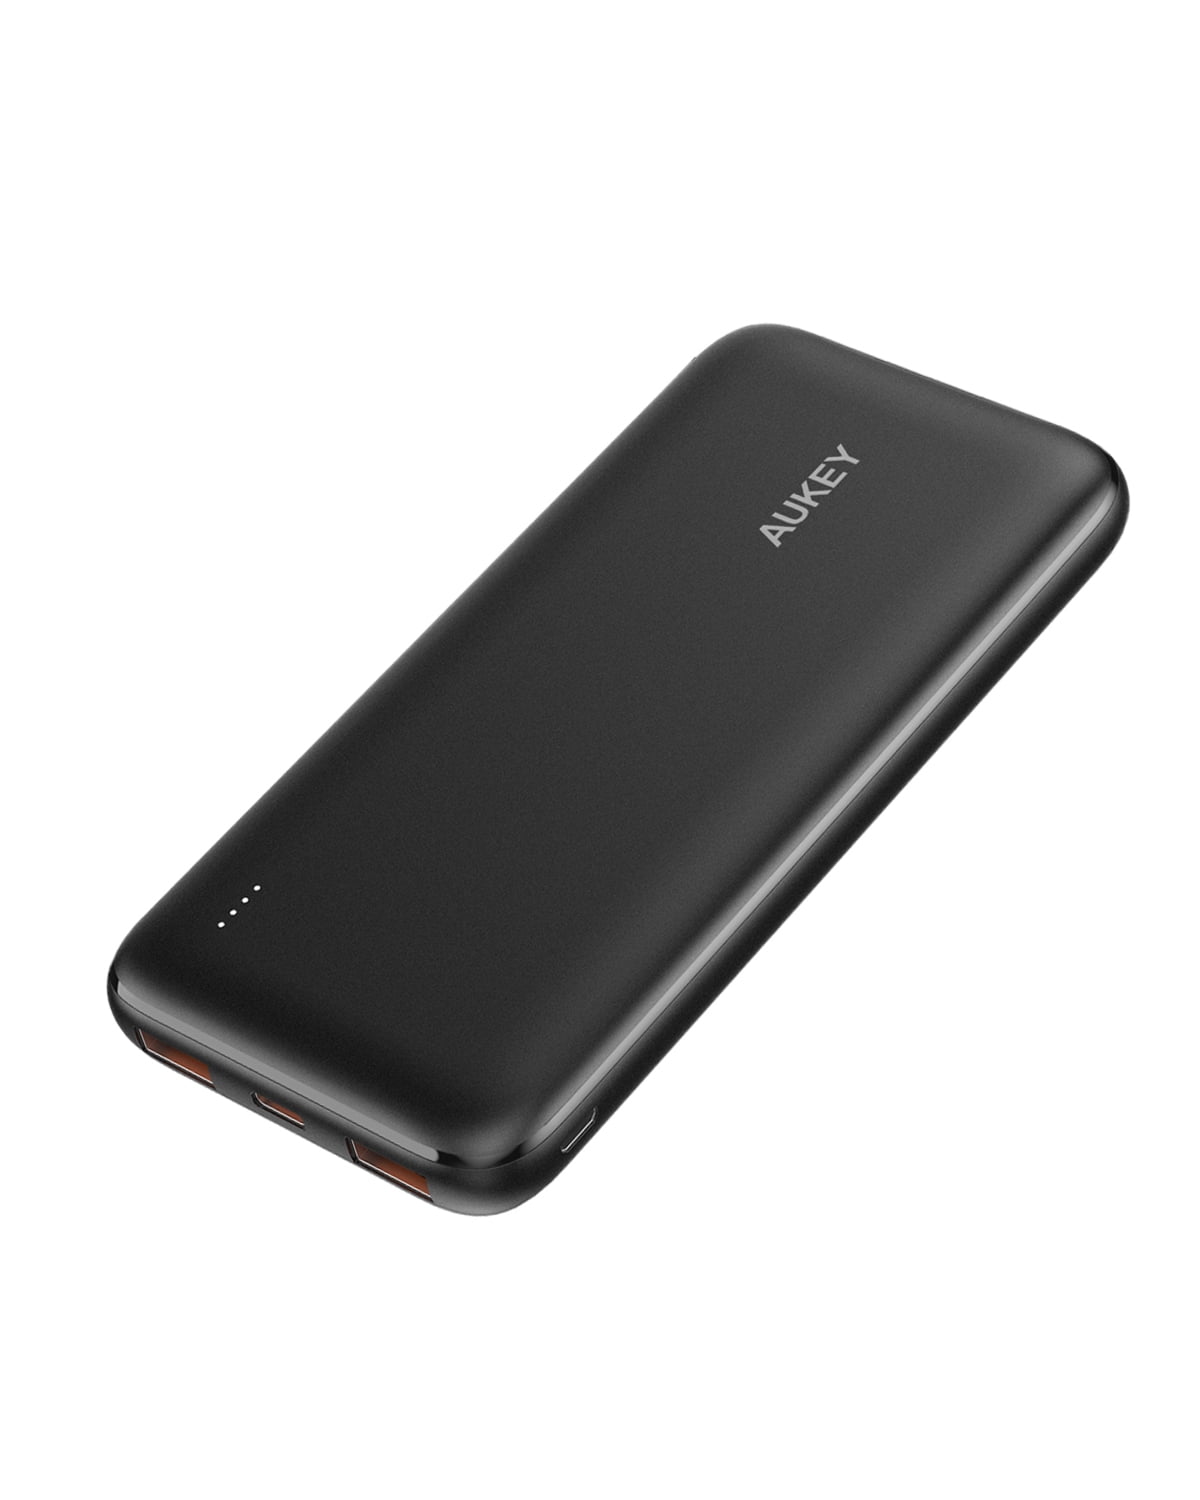 Powerful White LCD Display Portable Charger 10000mAh, Ainope Power Bank/External Battery Pack/Battery Charger/Phone Backup with 2 USB Output,Perfect for Travel Small